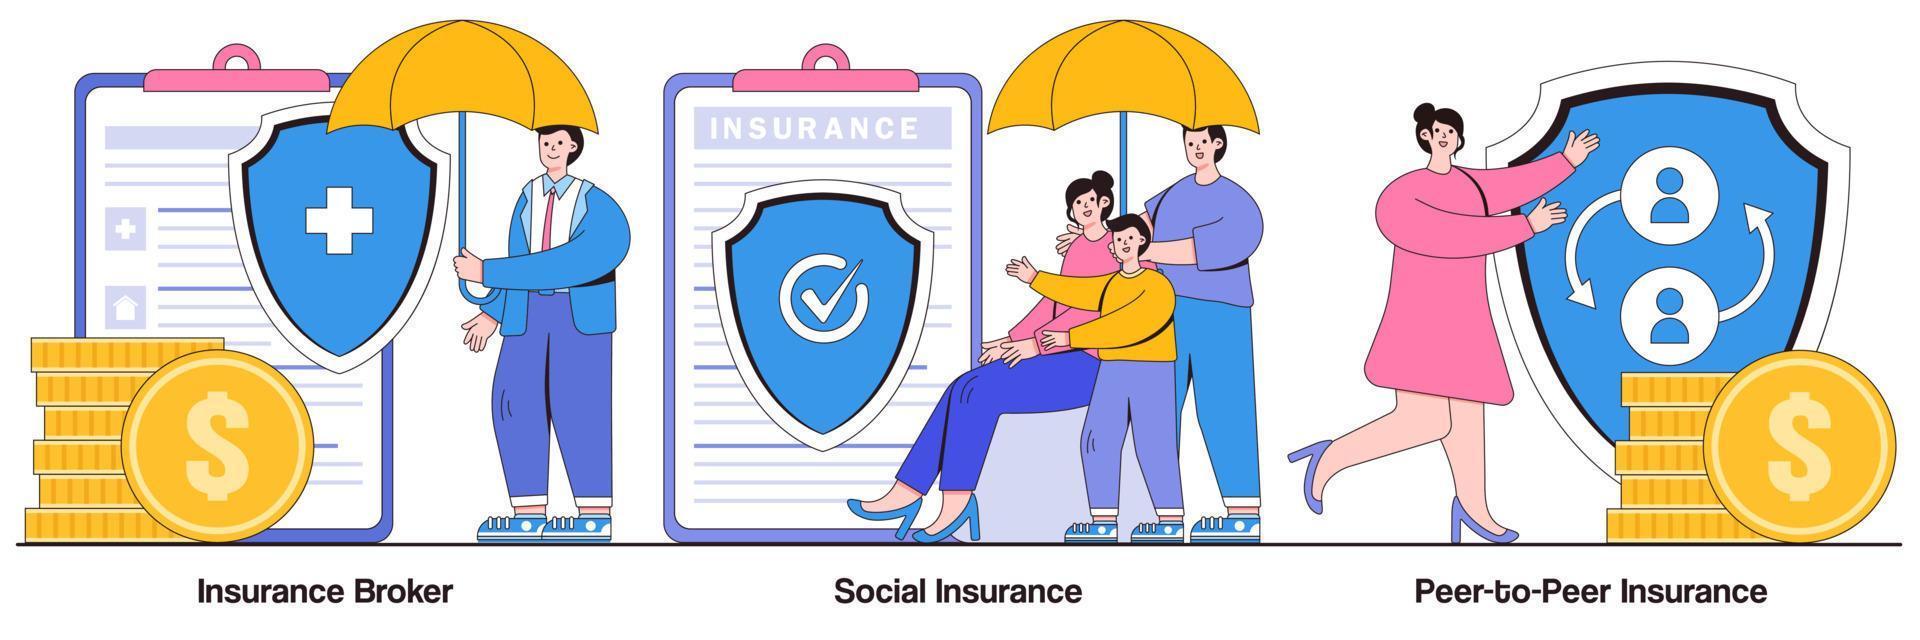 Insurance broker, social insurance, peer-to-peer insurance concept with tiny people. Risk insurance vector illustration set. Emergency risk, unemployment and income loss, pension trust fund metaphor